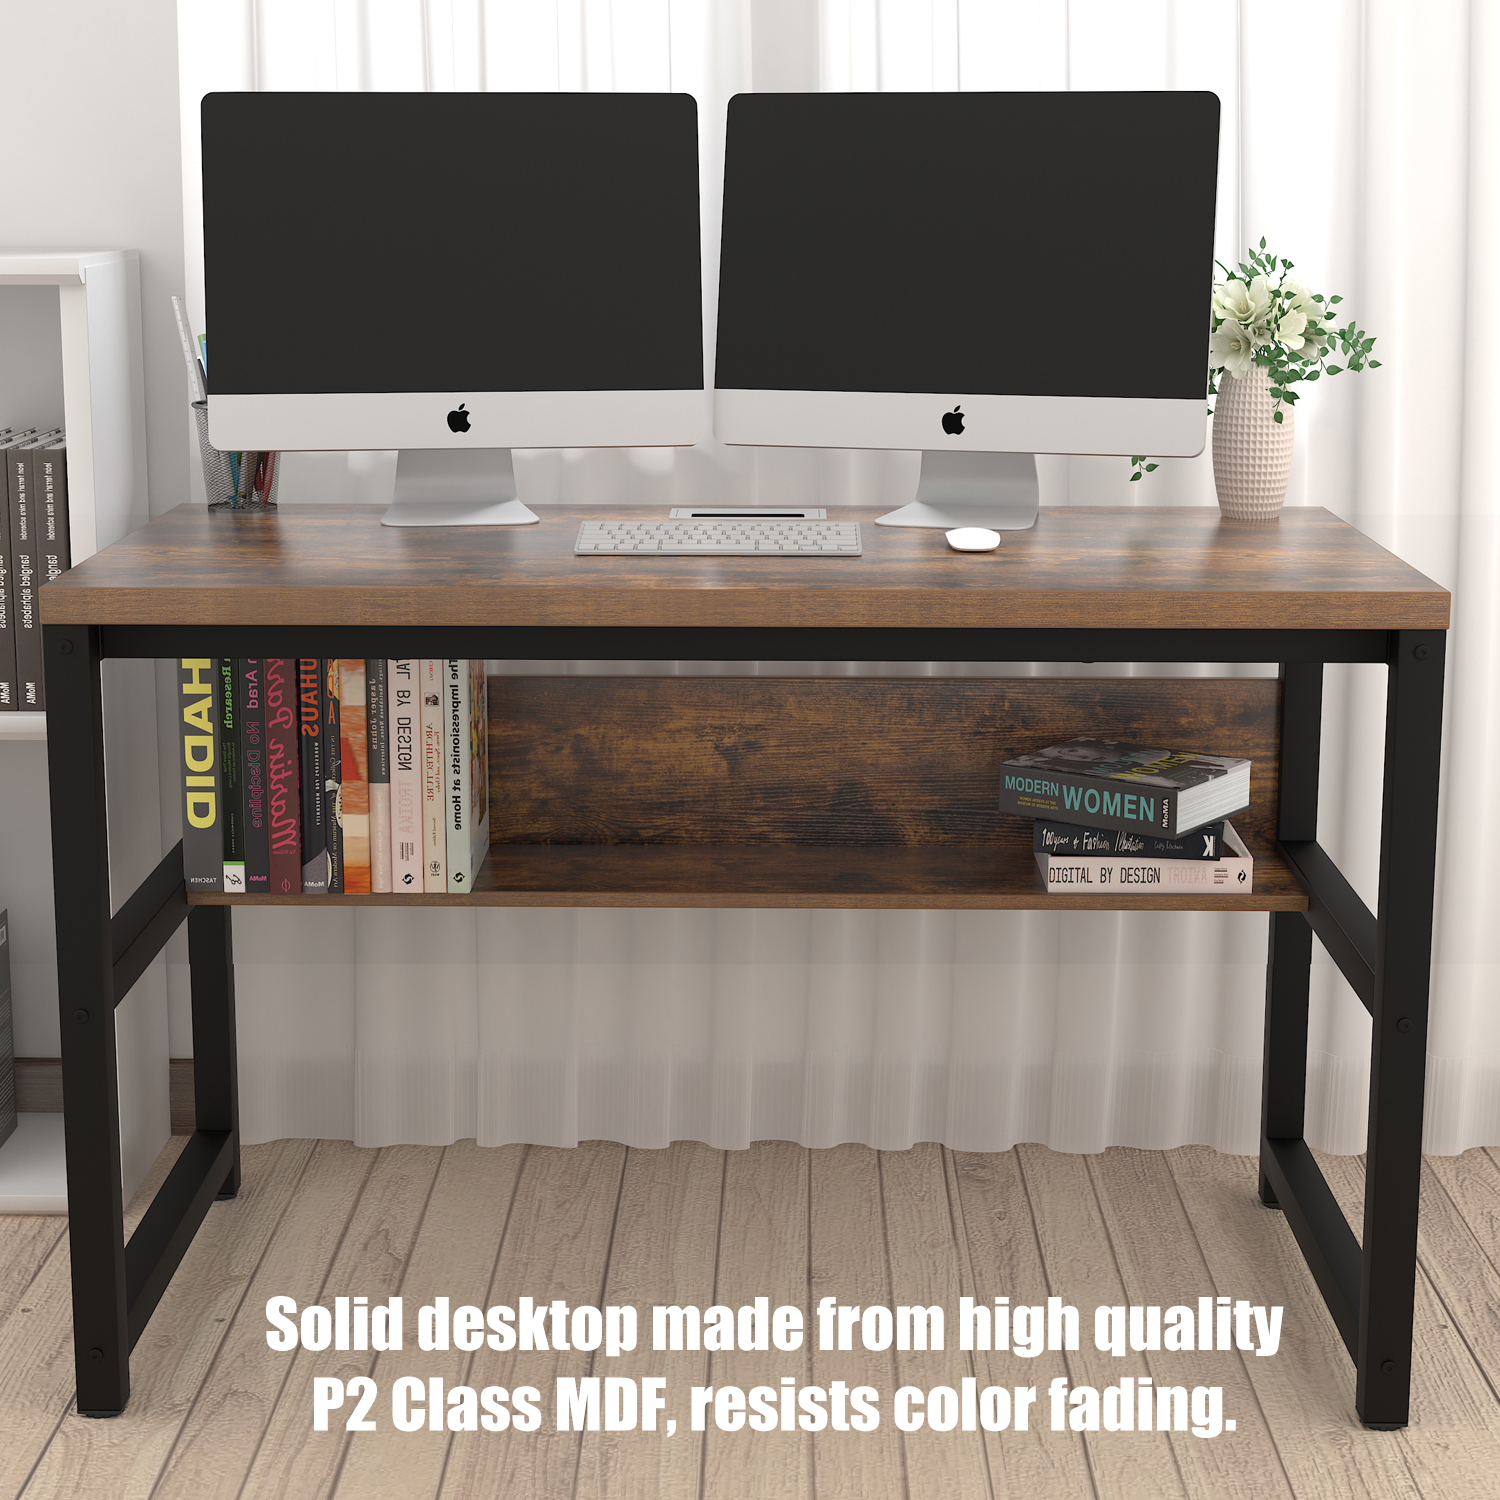 TOPSKY 47" Computer Desk with Bookshelf/Metal Hole Cable Cover 1.18" Thick Desk CT-8025A